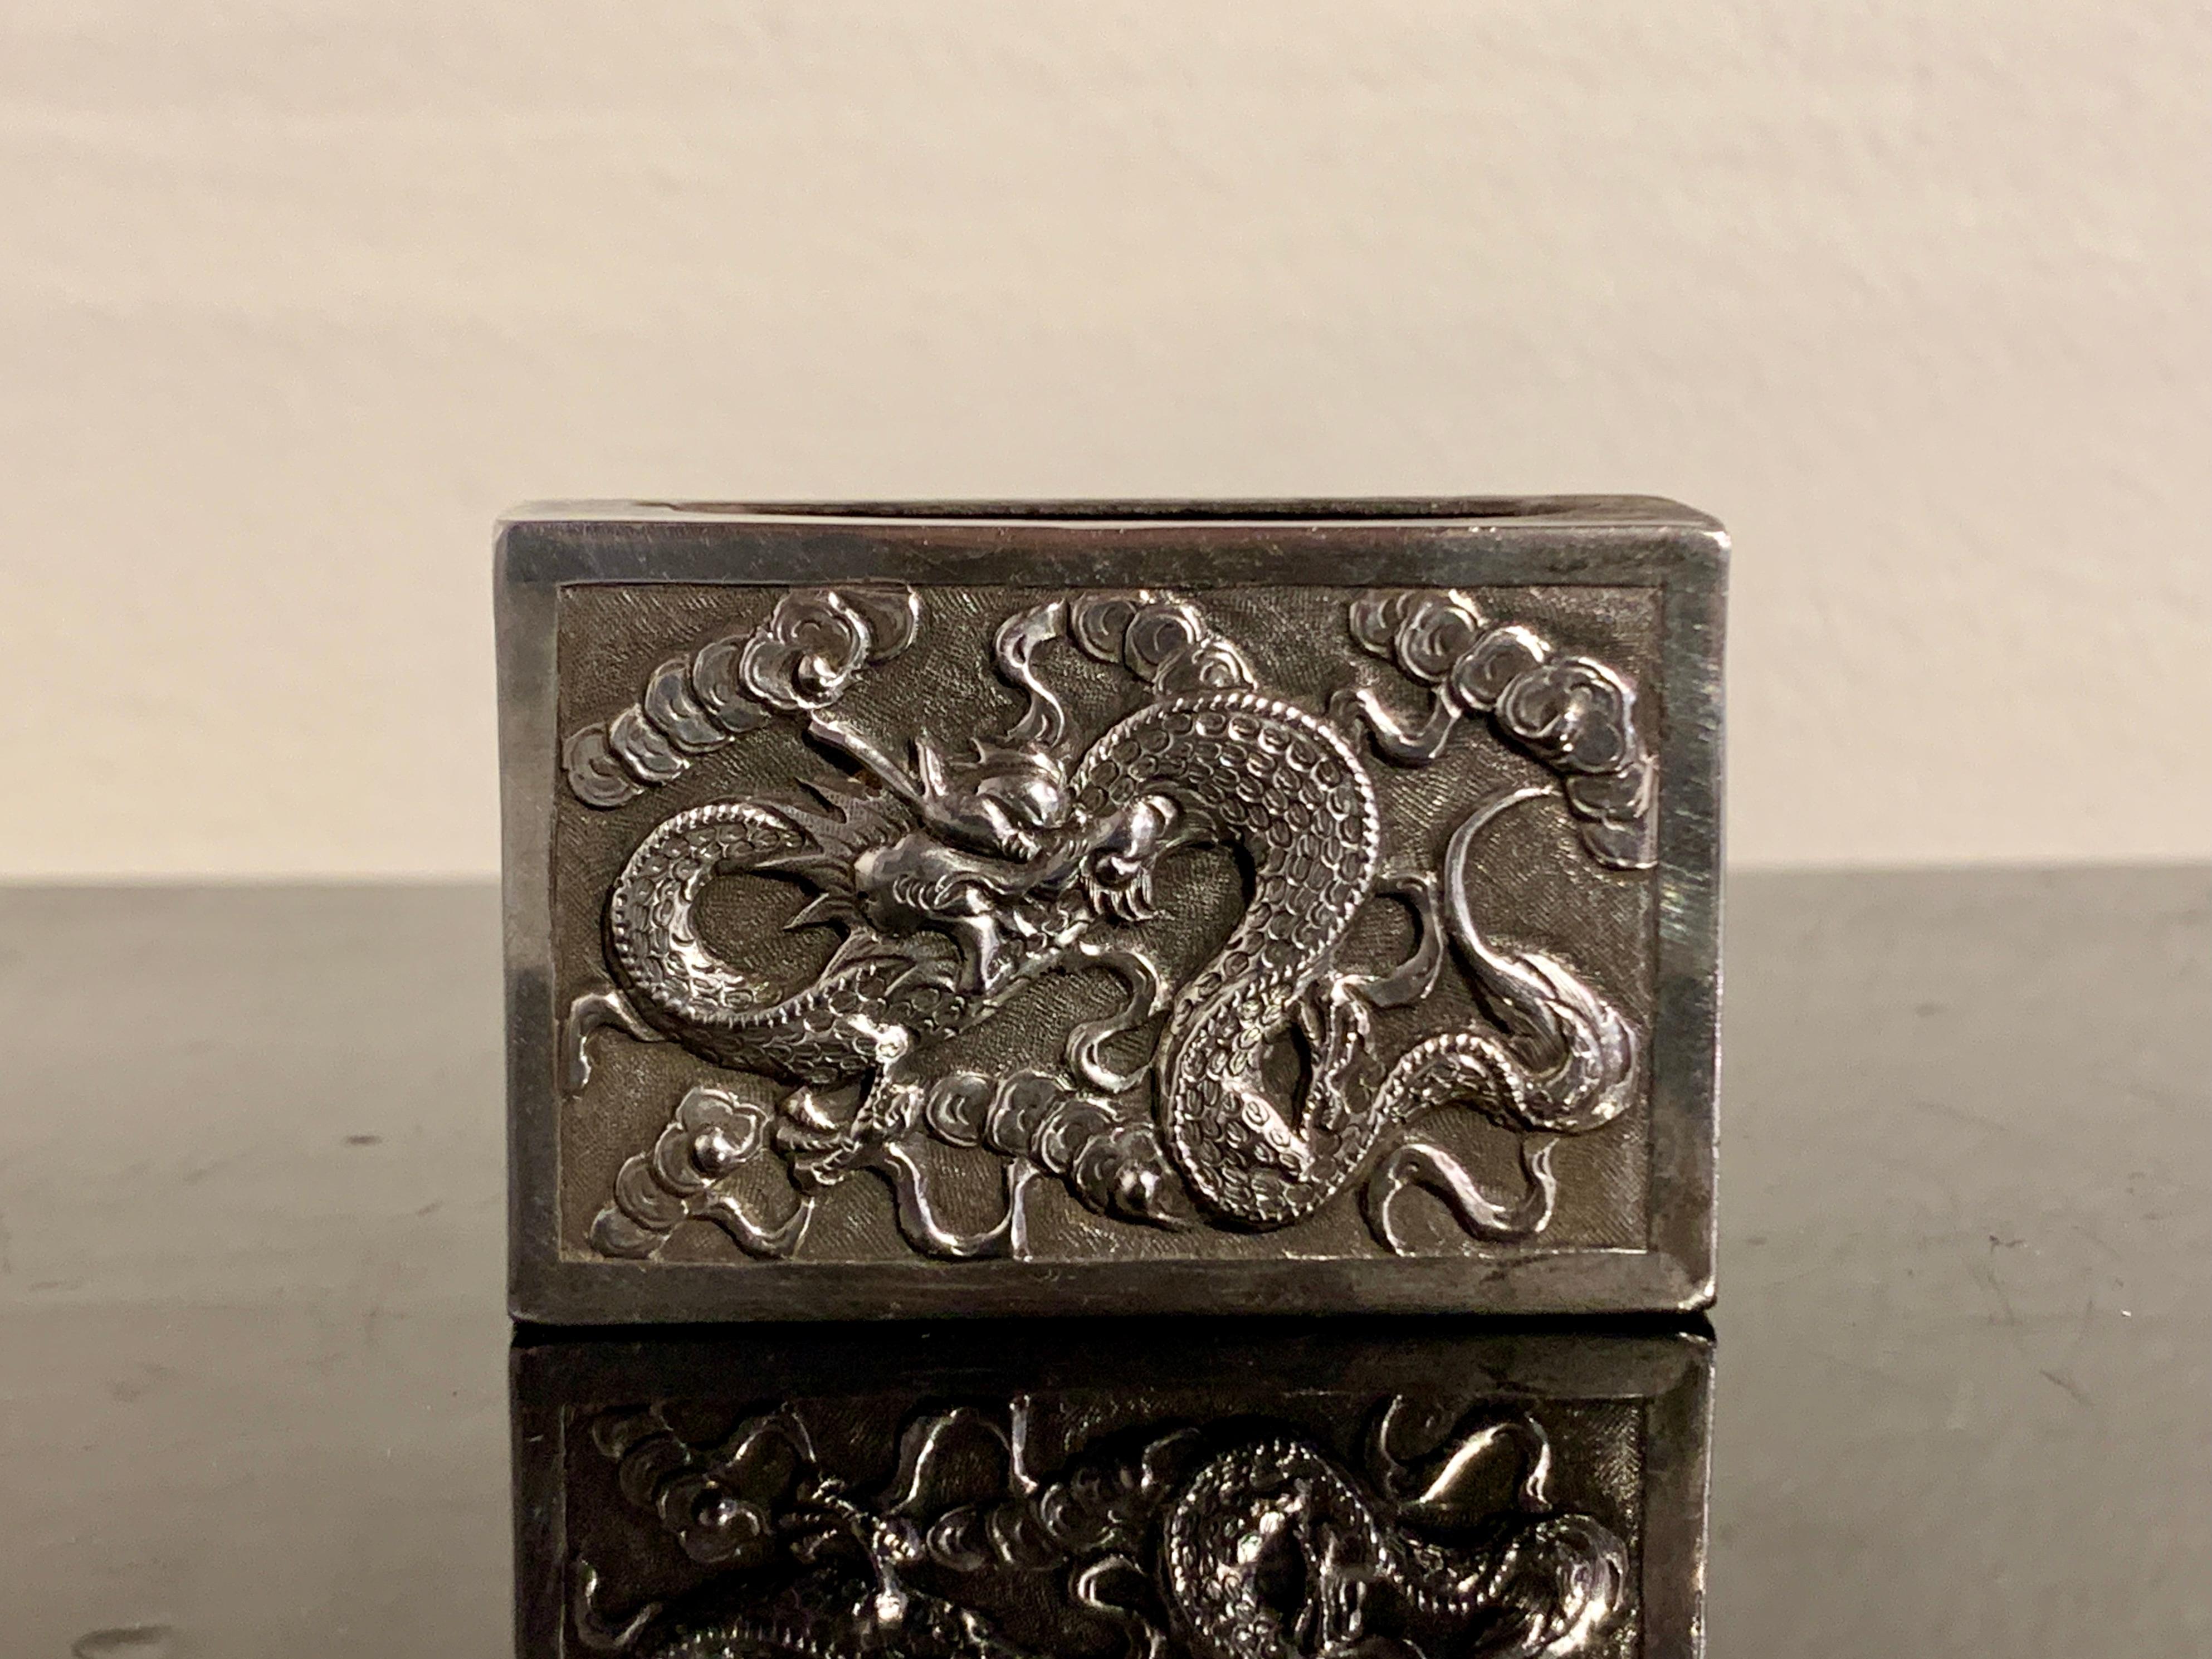 A wonderful Chinese export silver matchbox holder or cover, by Hone Wo, early 20th century, China.

The silver matchbox cover decorated with a fantastic dragon twisting and writhing in the clouds on one side - the shapes of the clouds reminiscent of